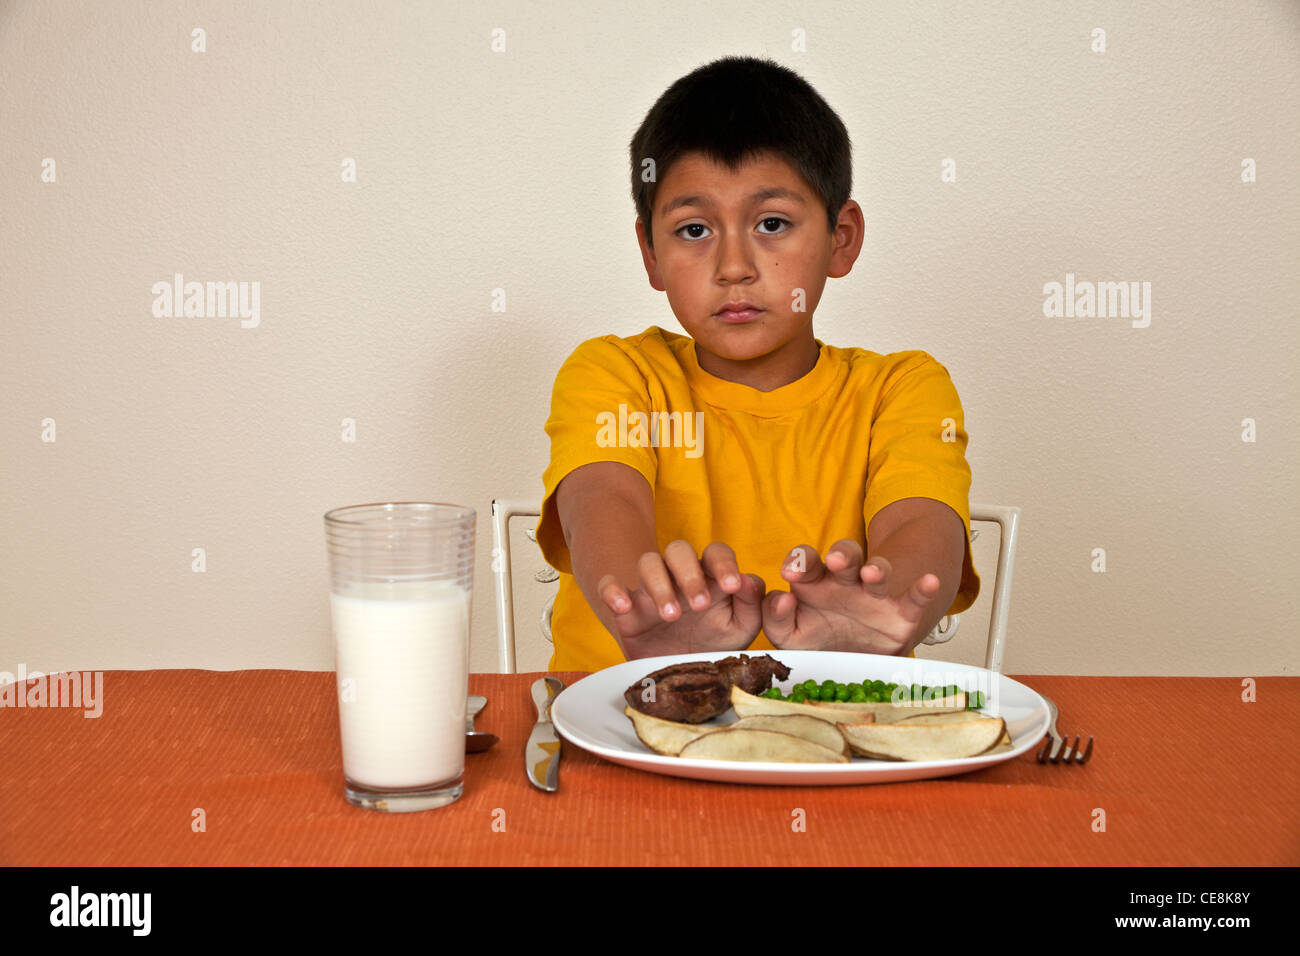 Strong willed stubborn 10-11 year old Hispanic boy doesn't want to eat  multi racial diversity racially diverse multicultural cultural. Stock Photo